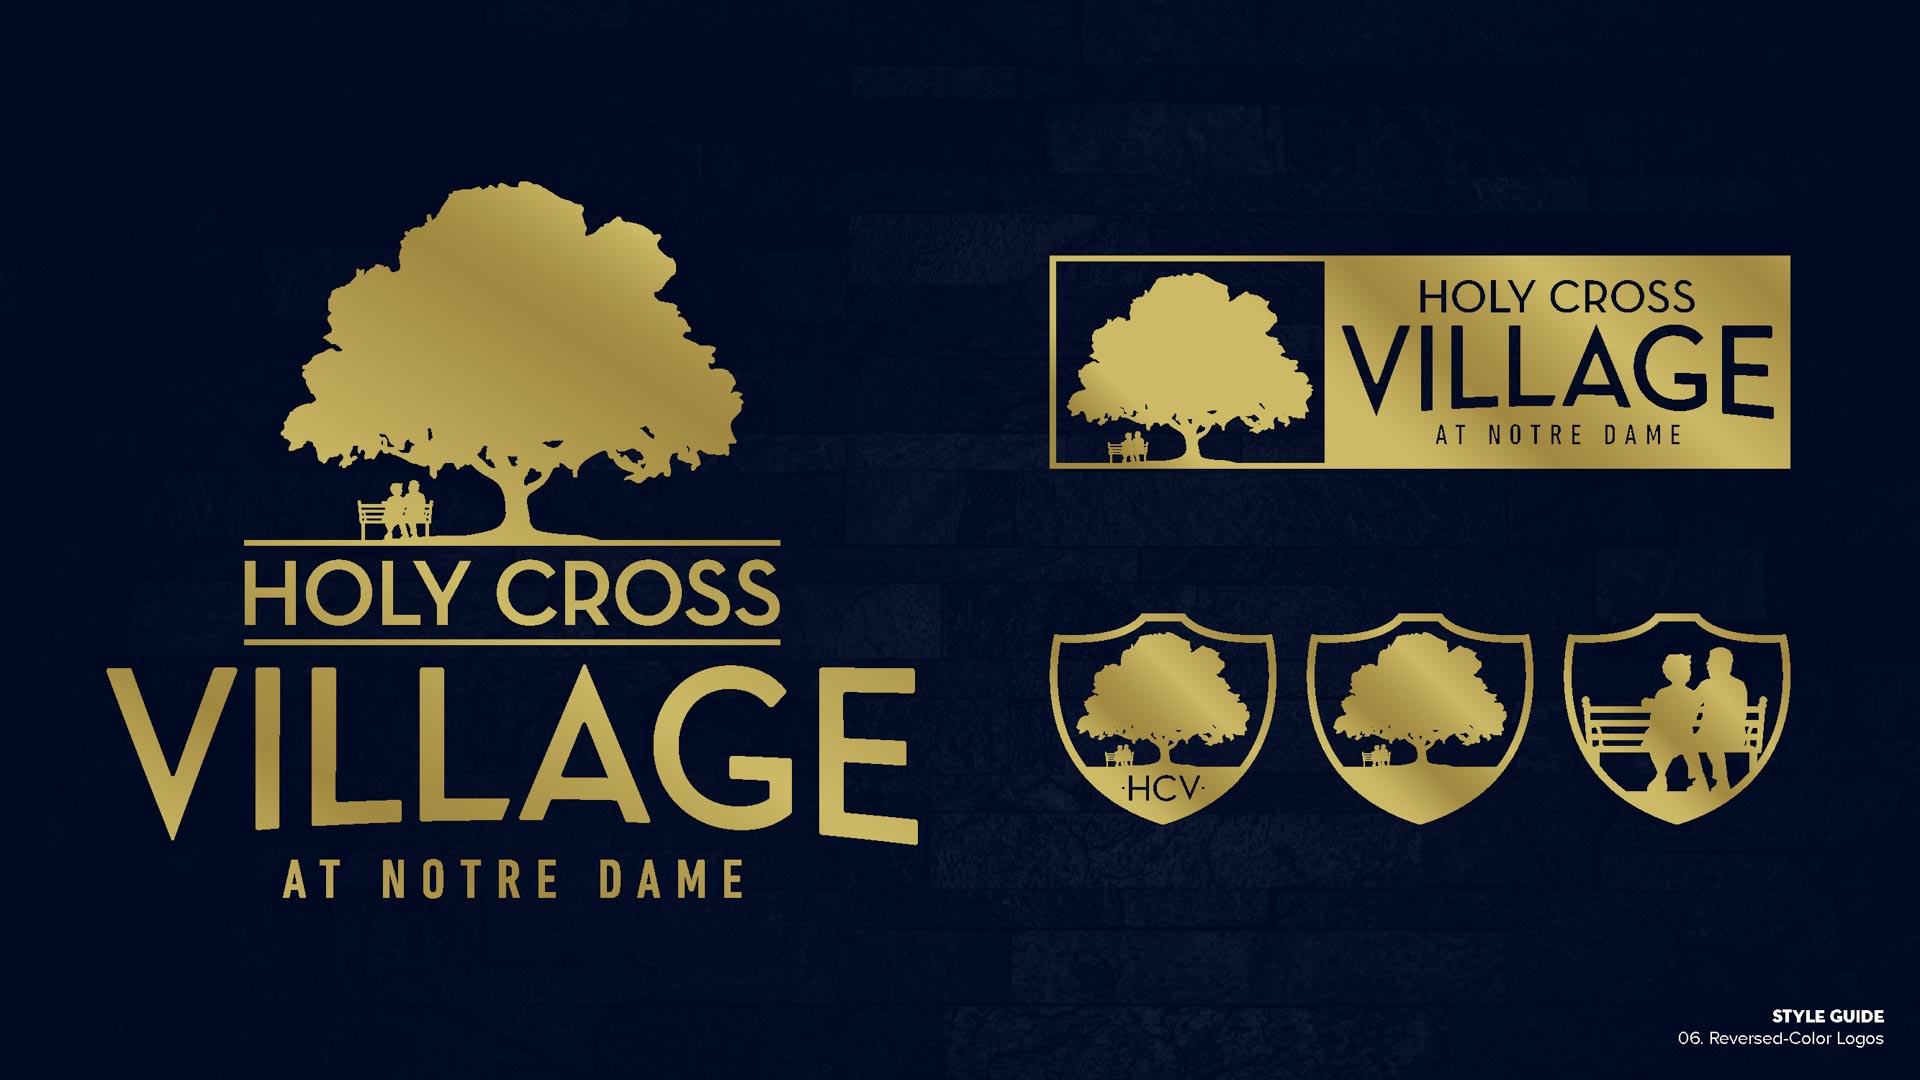 Holy Cross Village's One Color Logo Treatments